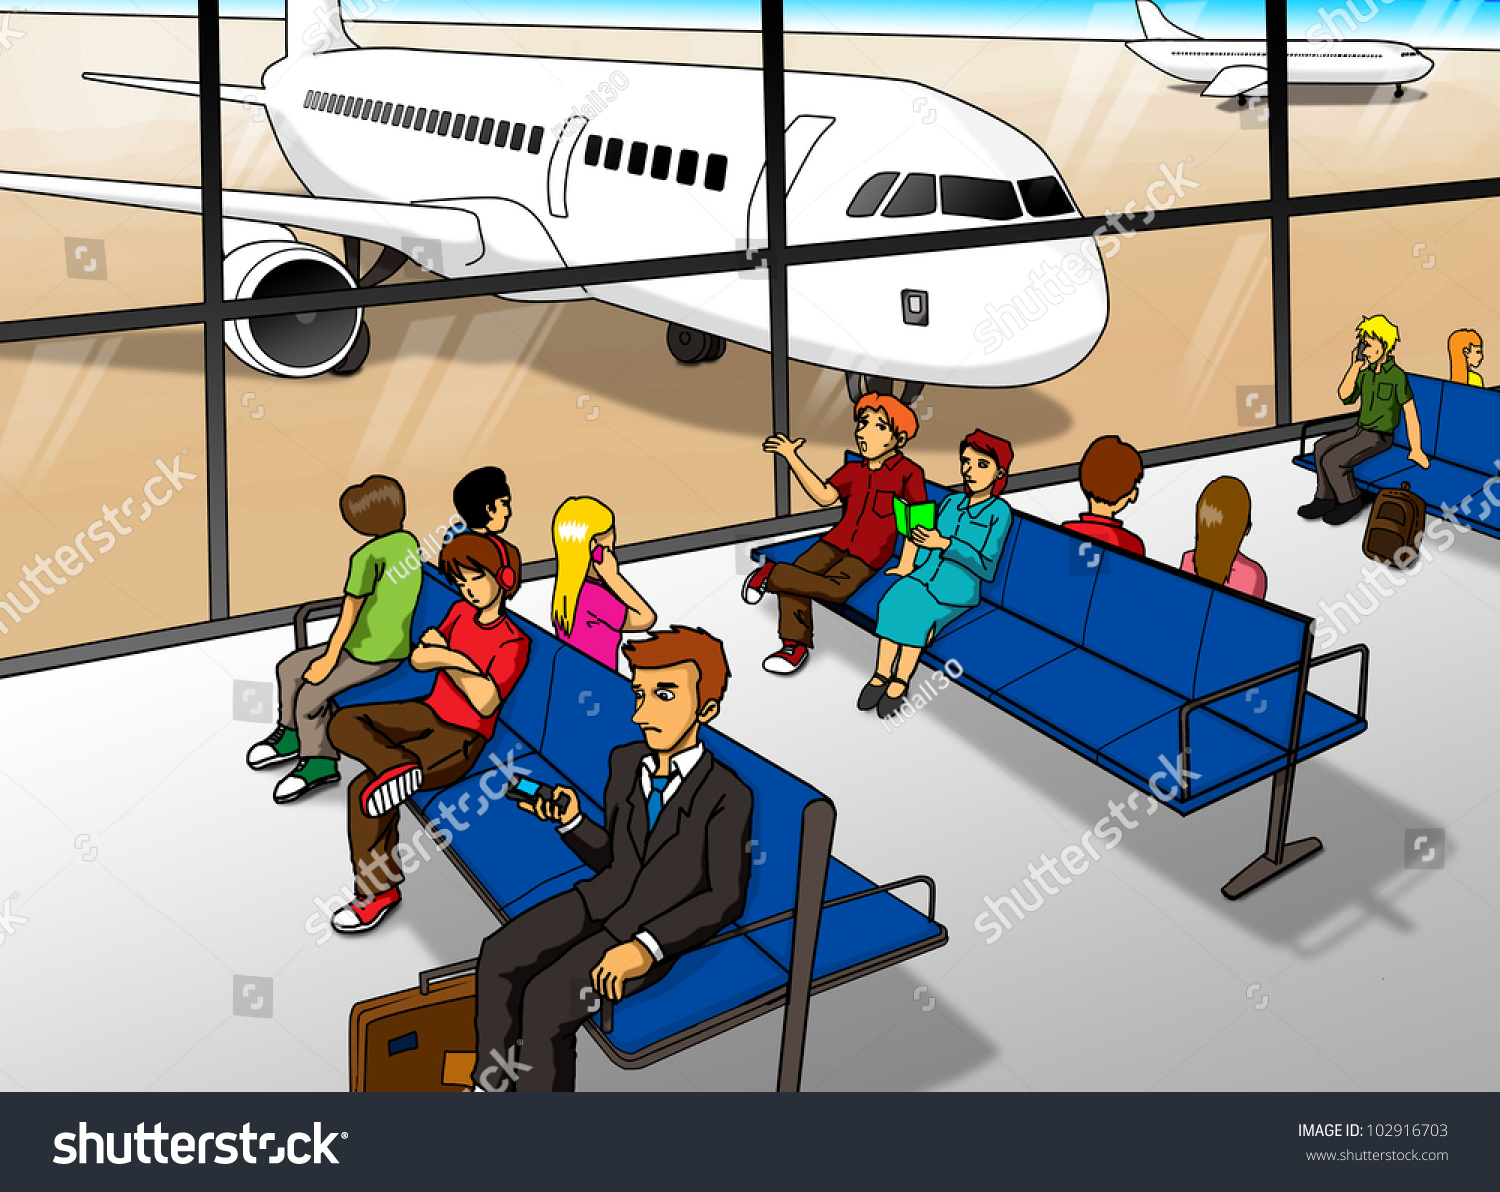 airport lounge clipart - photo #5